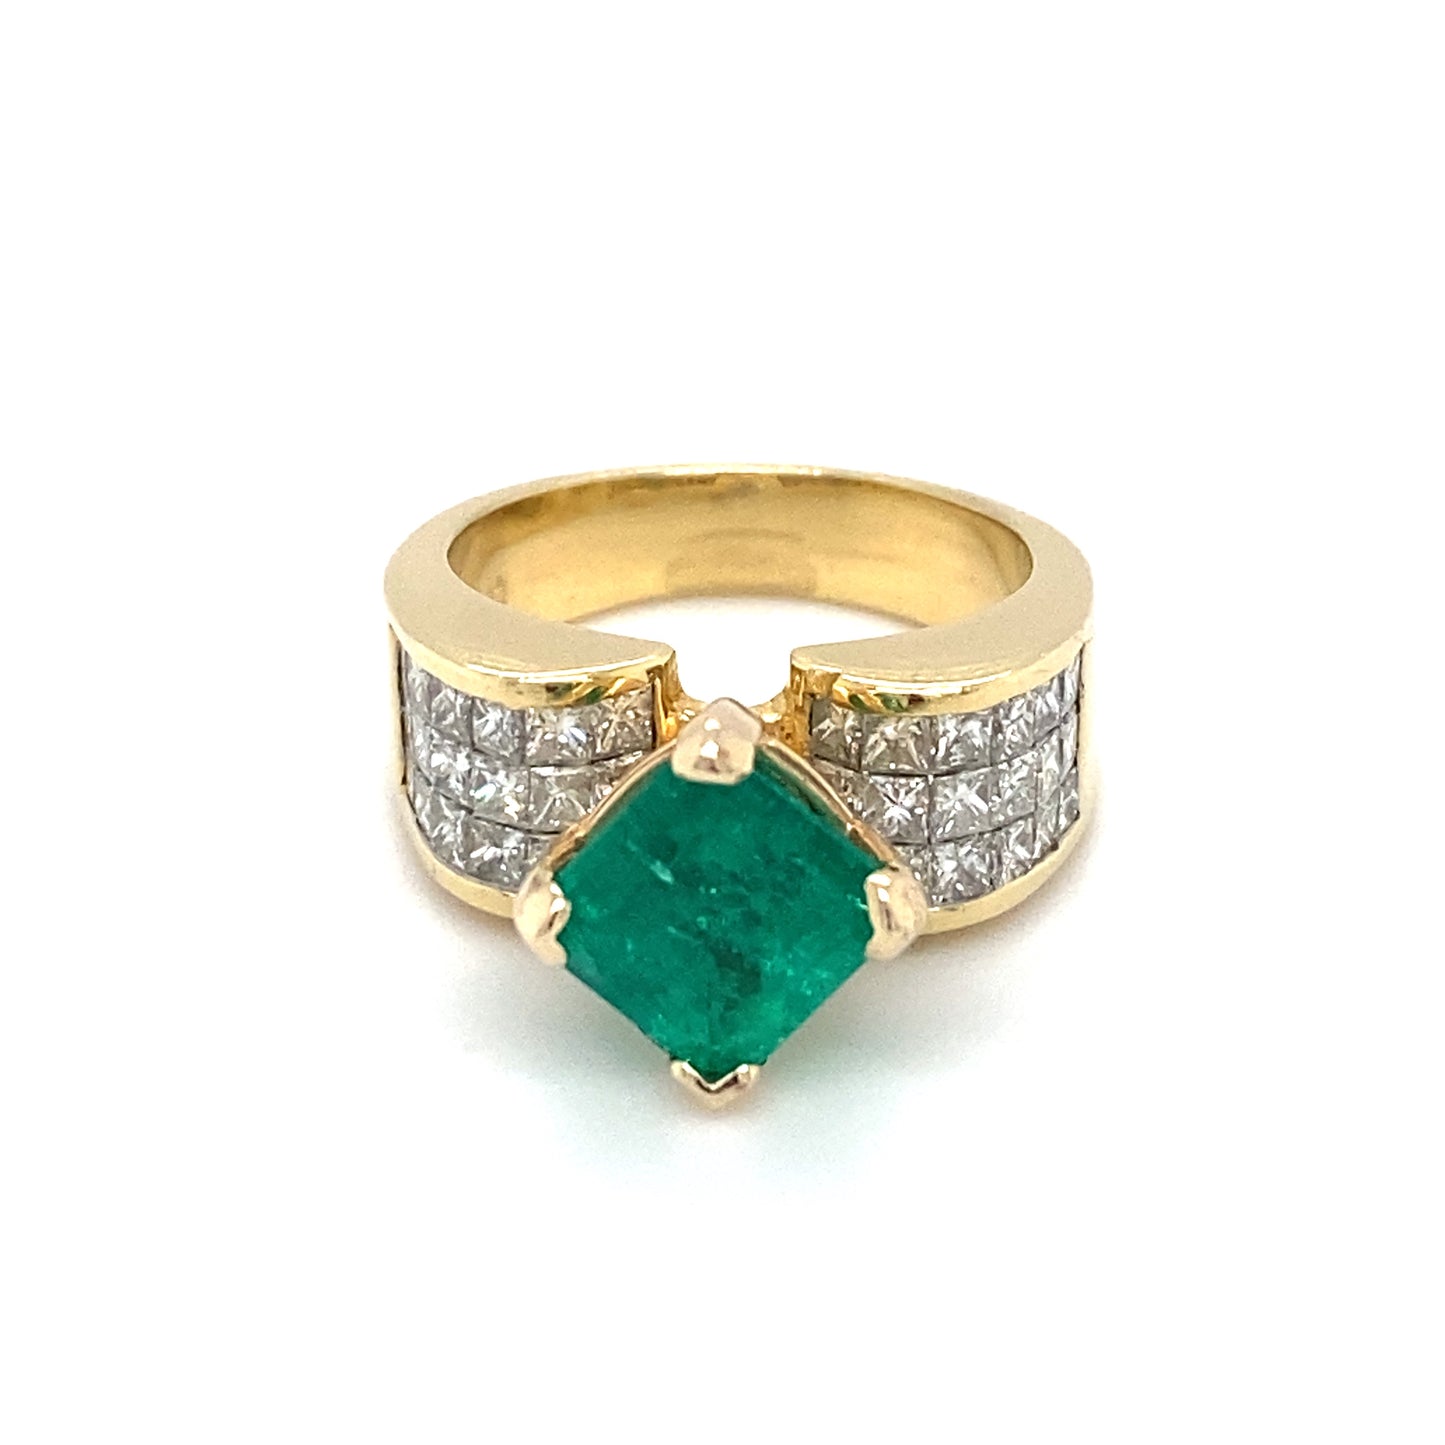 Le Vian 5.0 Carat Emerald and Diamond Ring in 18K Gold